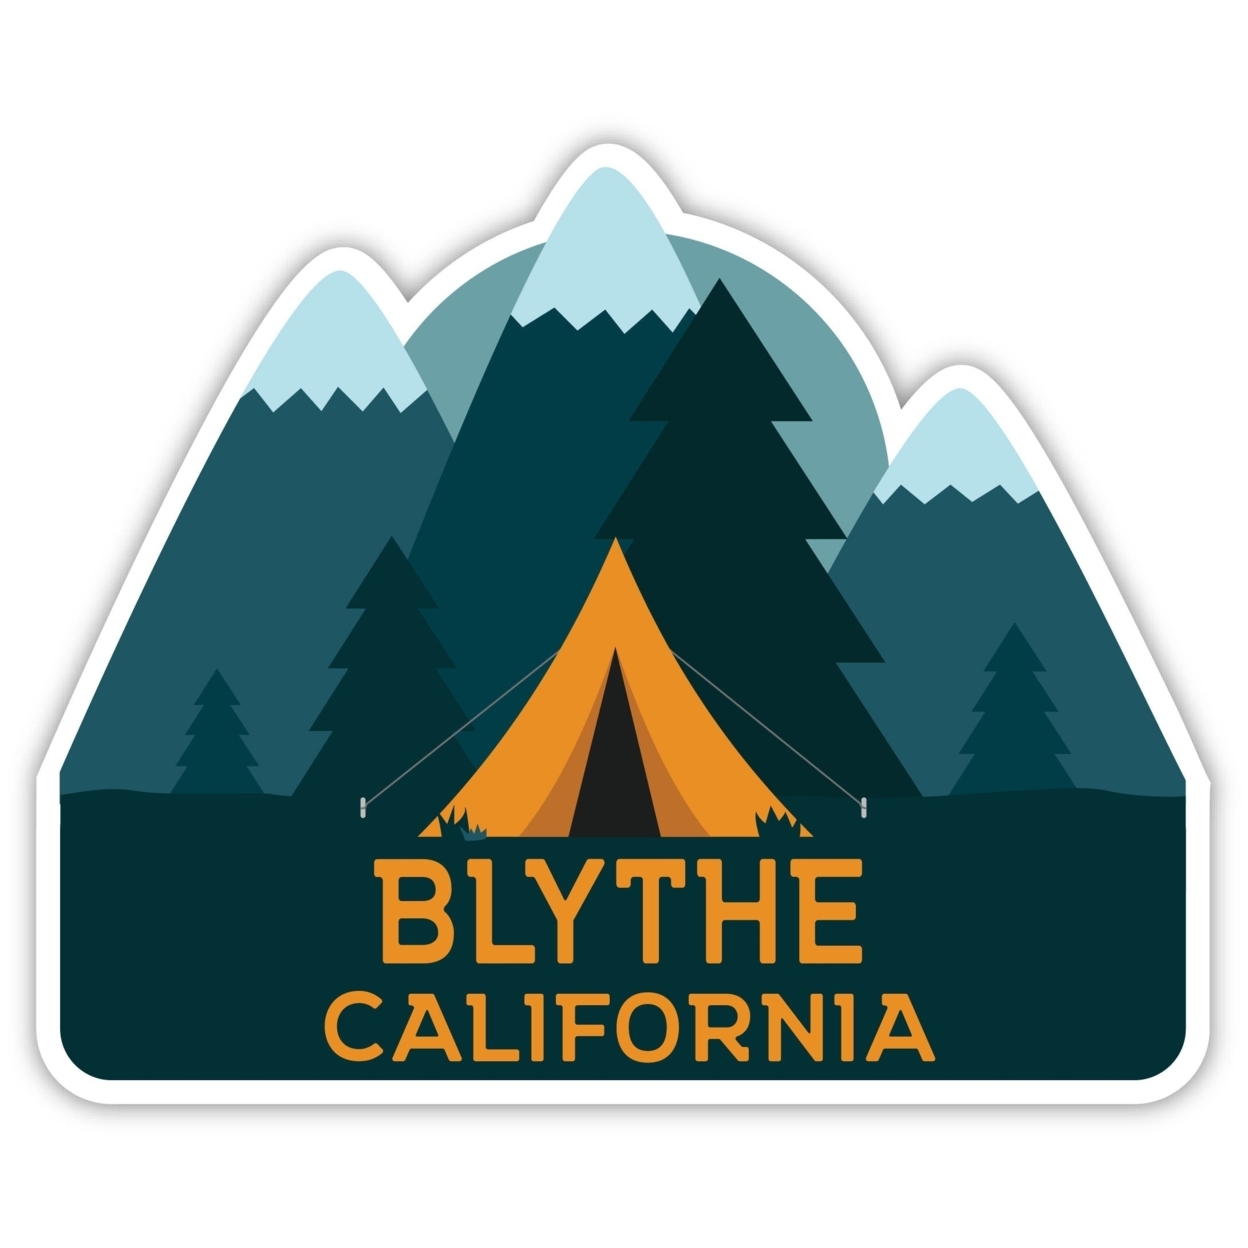 Blythe California Souvenir Decorative Stickers (Choose Theme And Size) - 4-Pack, 6-Inch, Tent